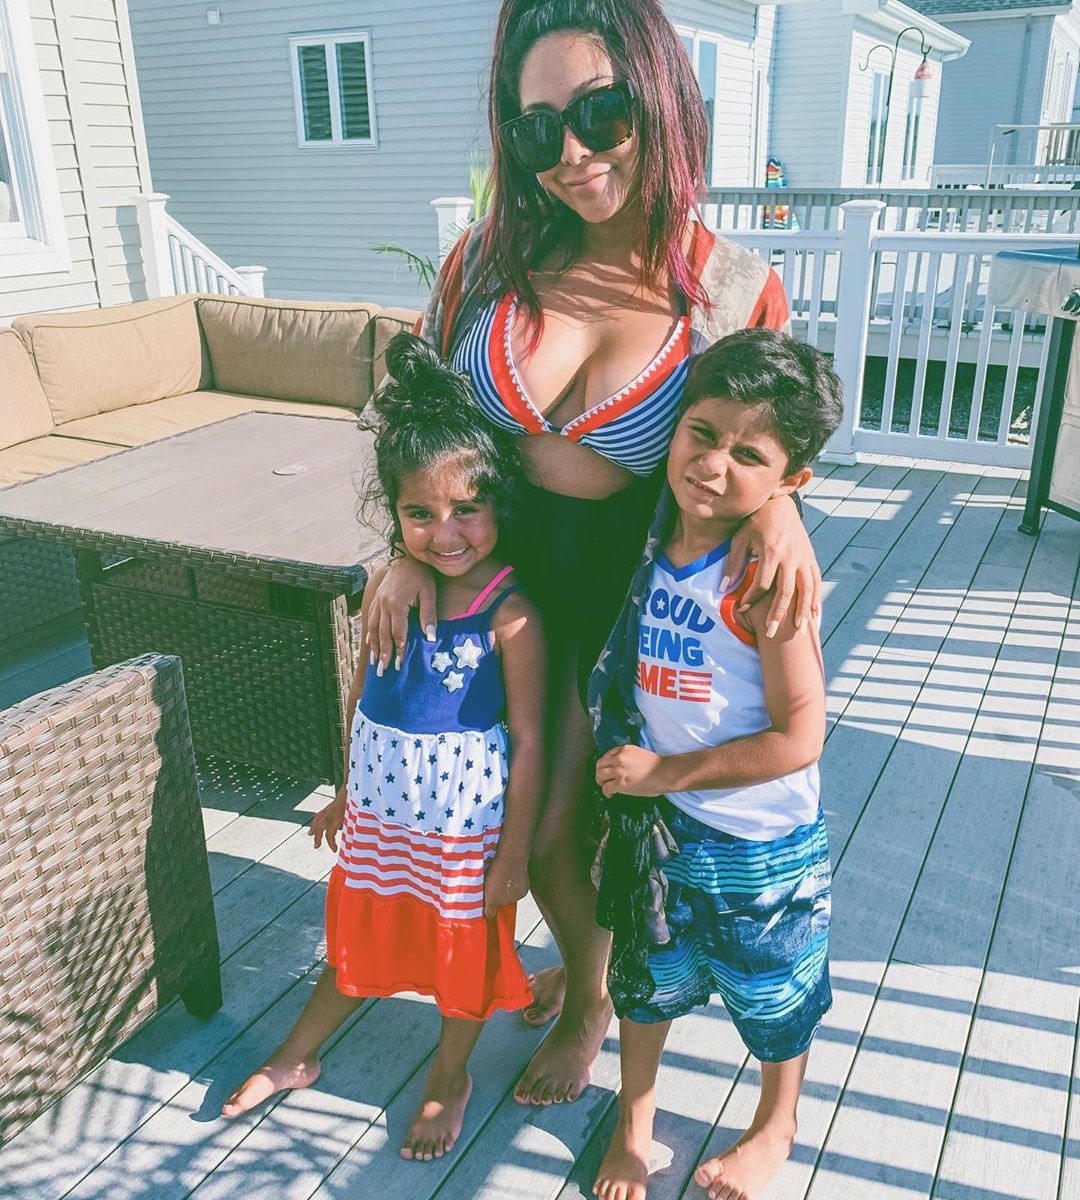 Snooki's Transformation: See the 'Jersey Shore' Star Then and Now